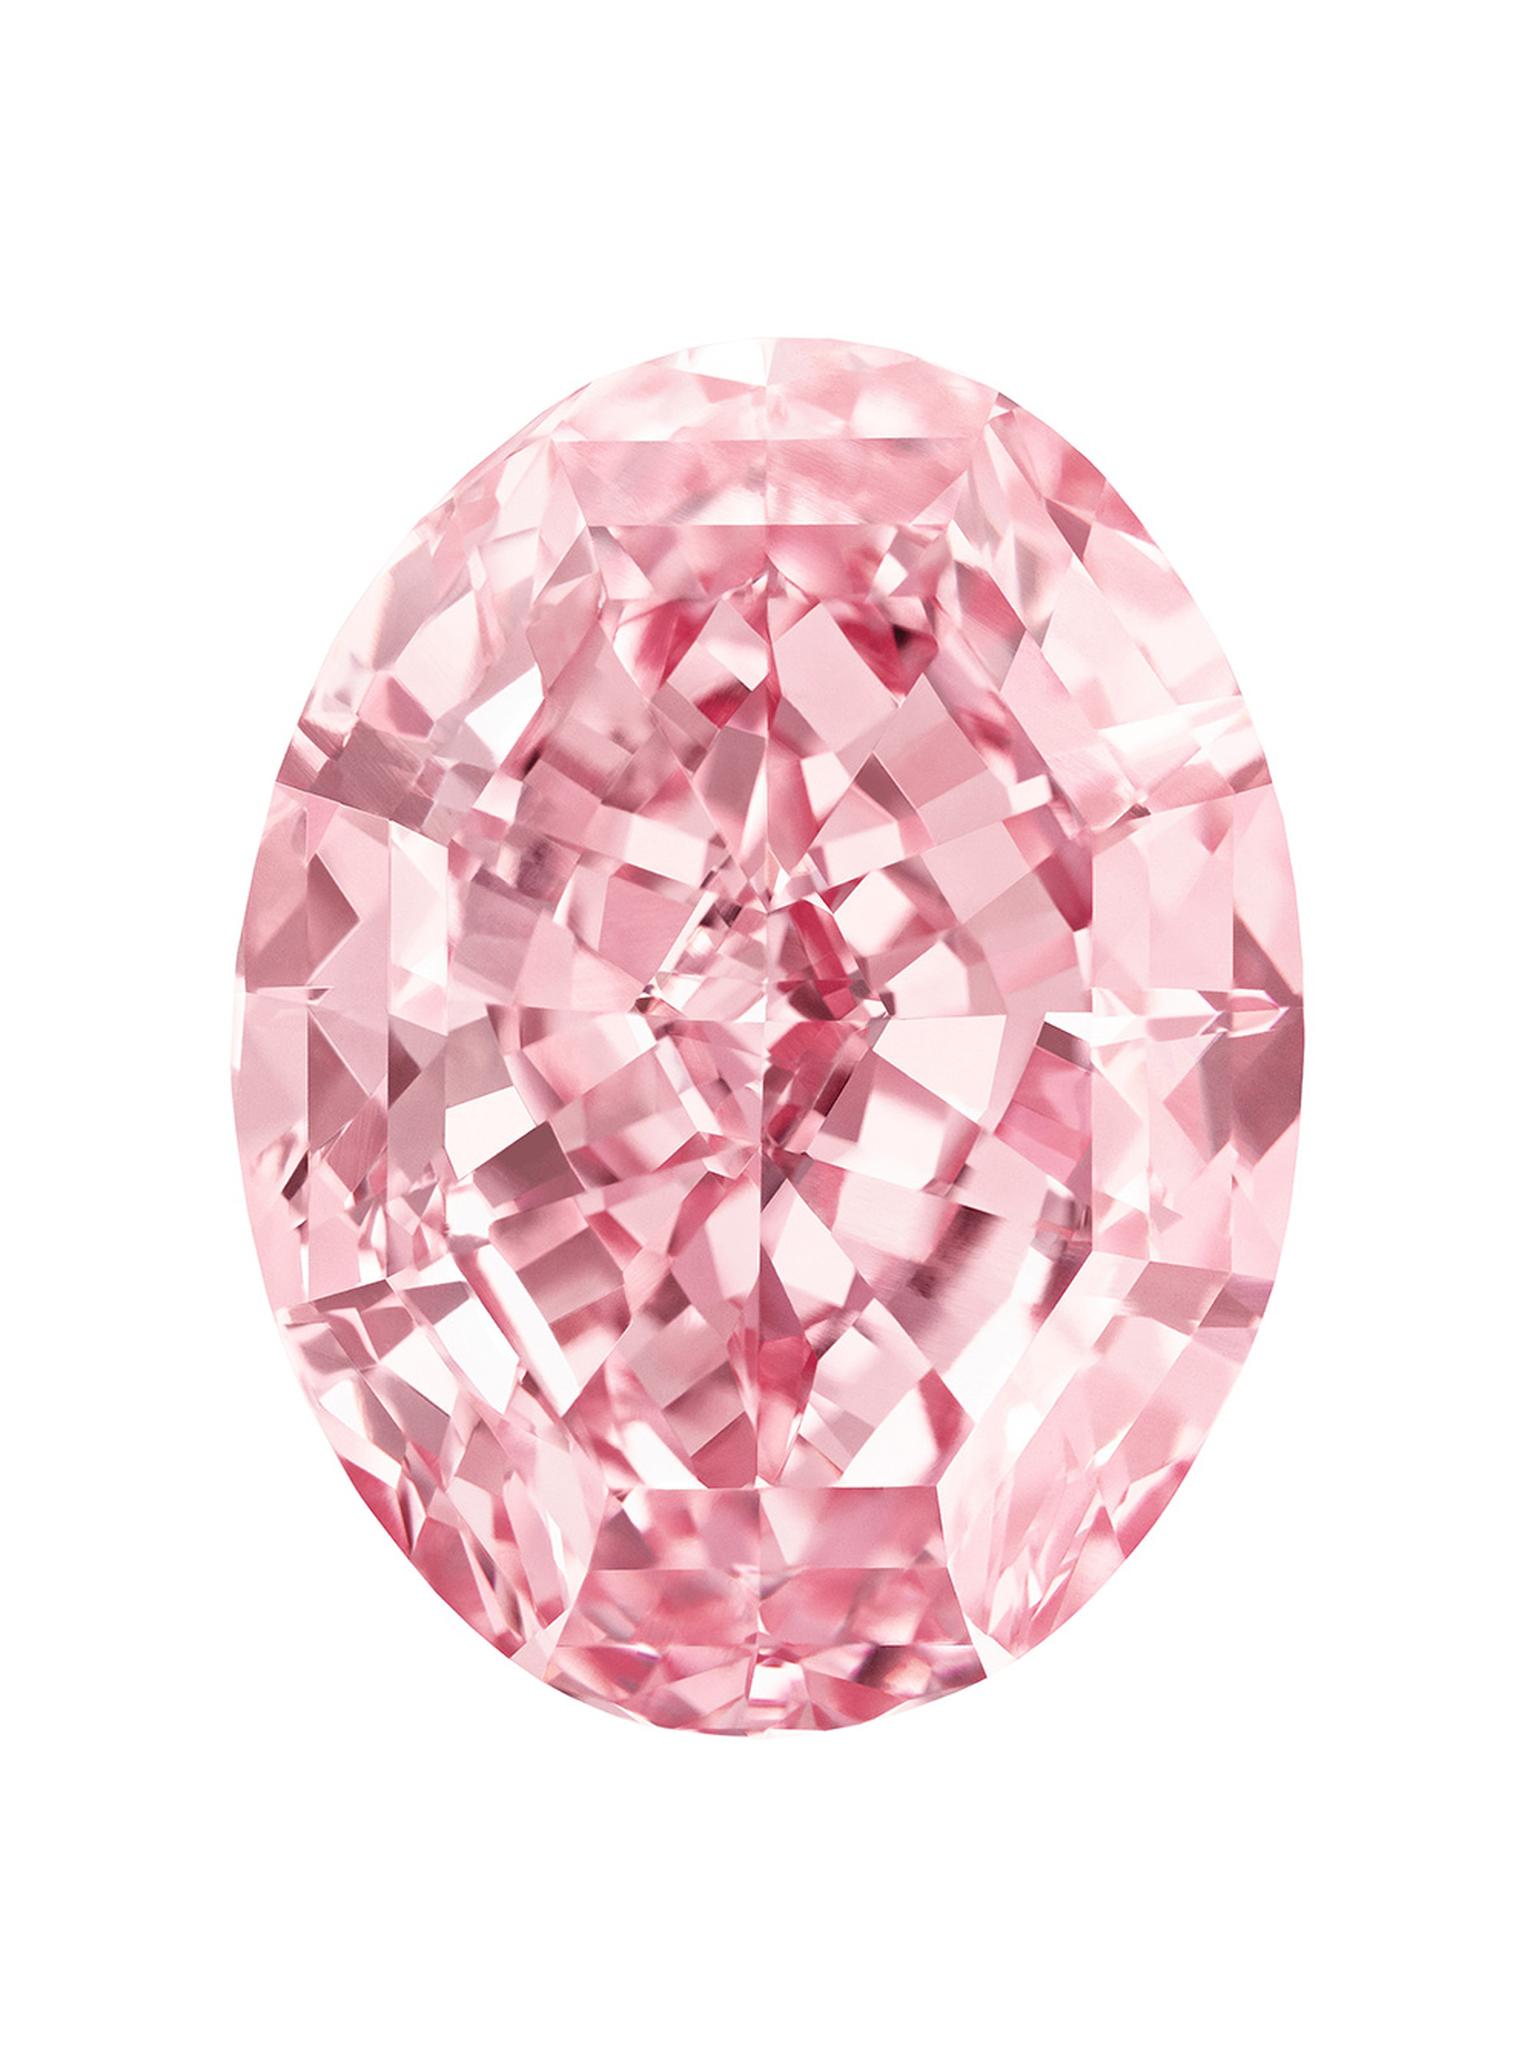 Called The Pink Star, this 59.60ct oval-cut pink diamond is the largest internally flawless Fancy Vivid pink diamond in the world. It was sold by Sotheby's for $83.19 million in November 2013 but the auction house was forced to reacquire it because the bu